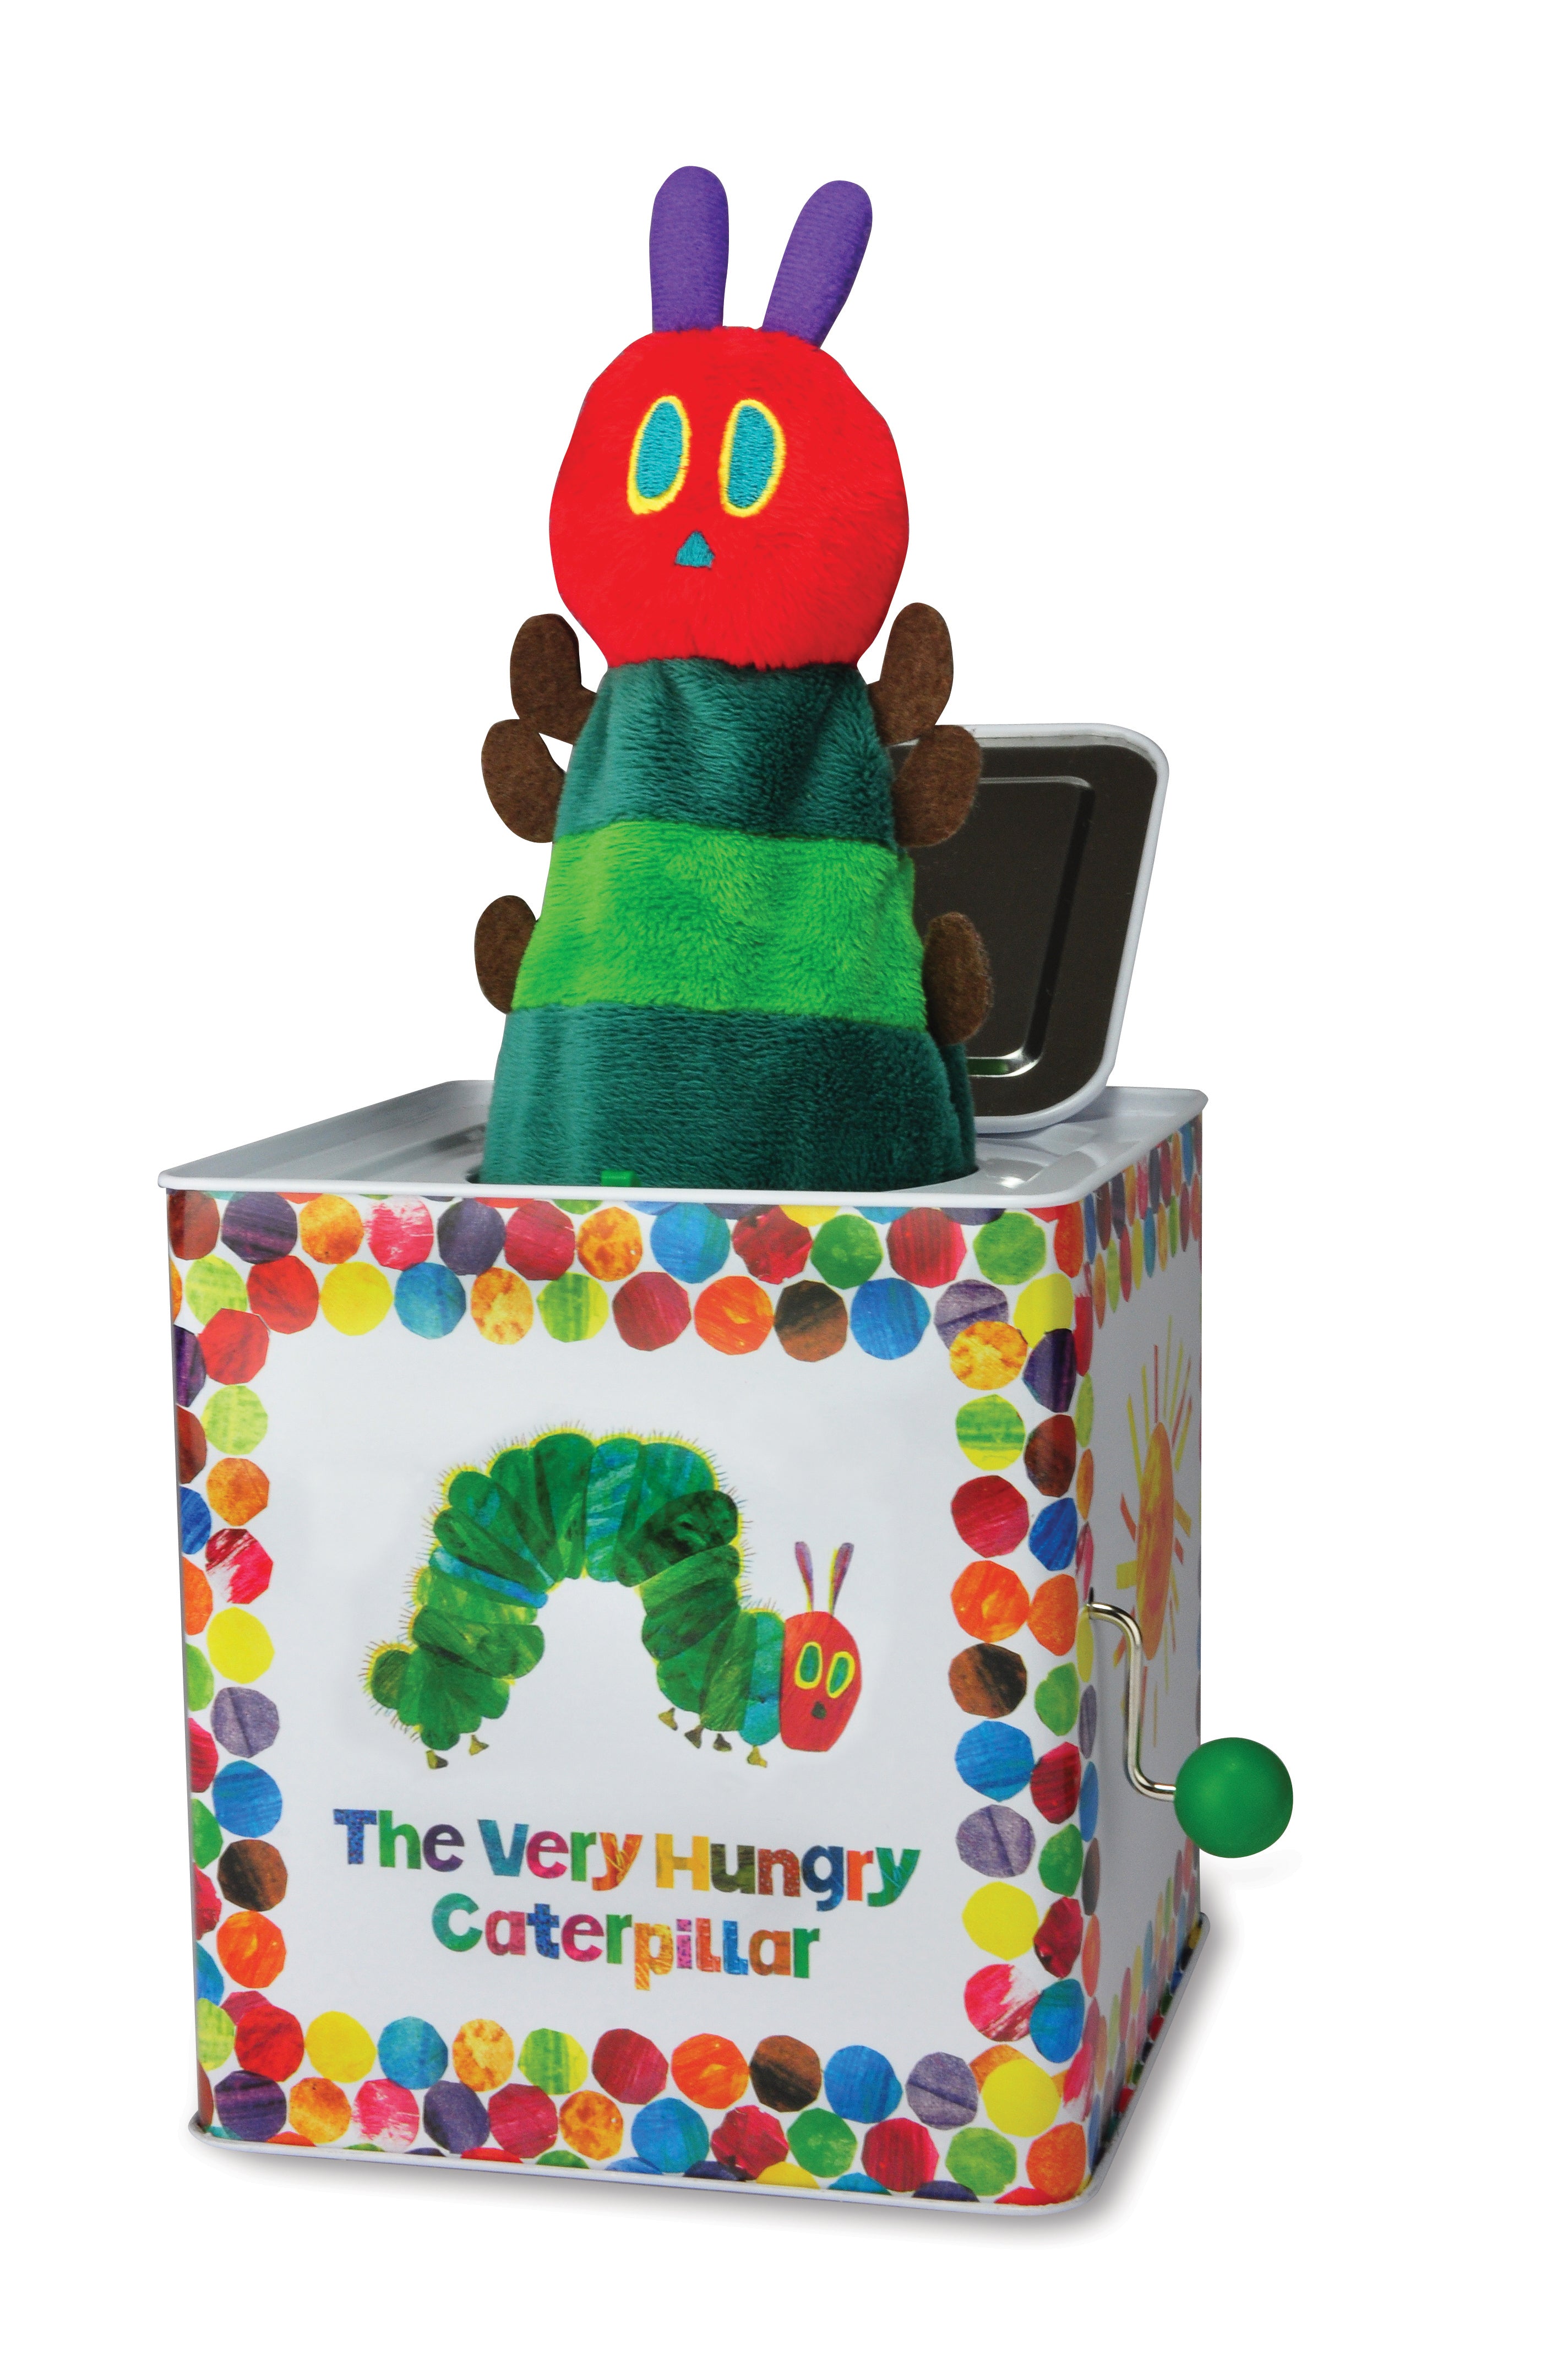 The World of Eric Carle The Very Hungry Caterpillar Jack-in-the